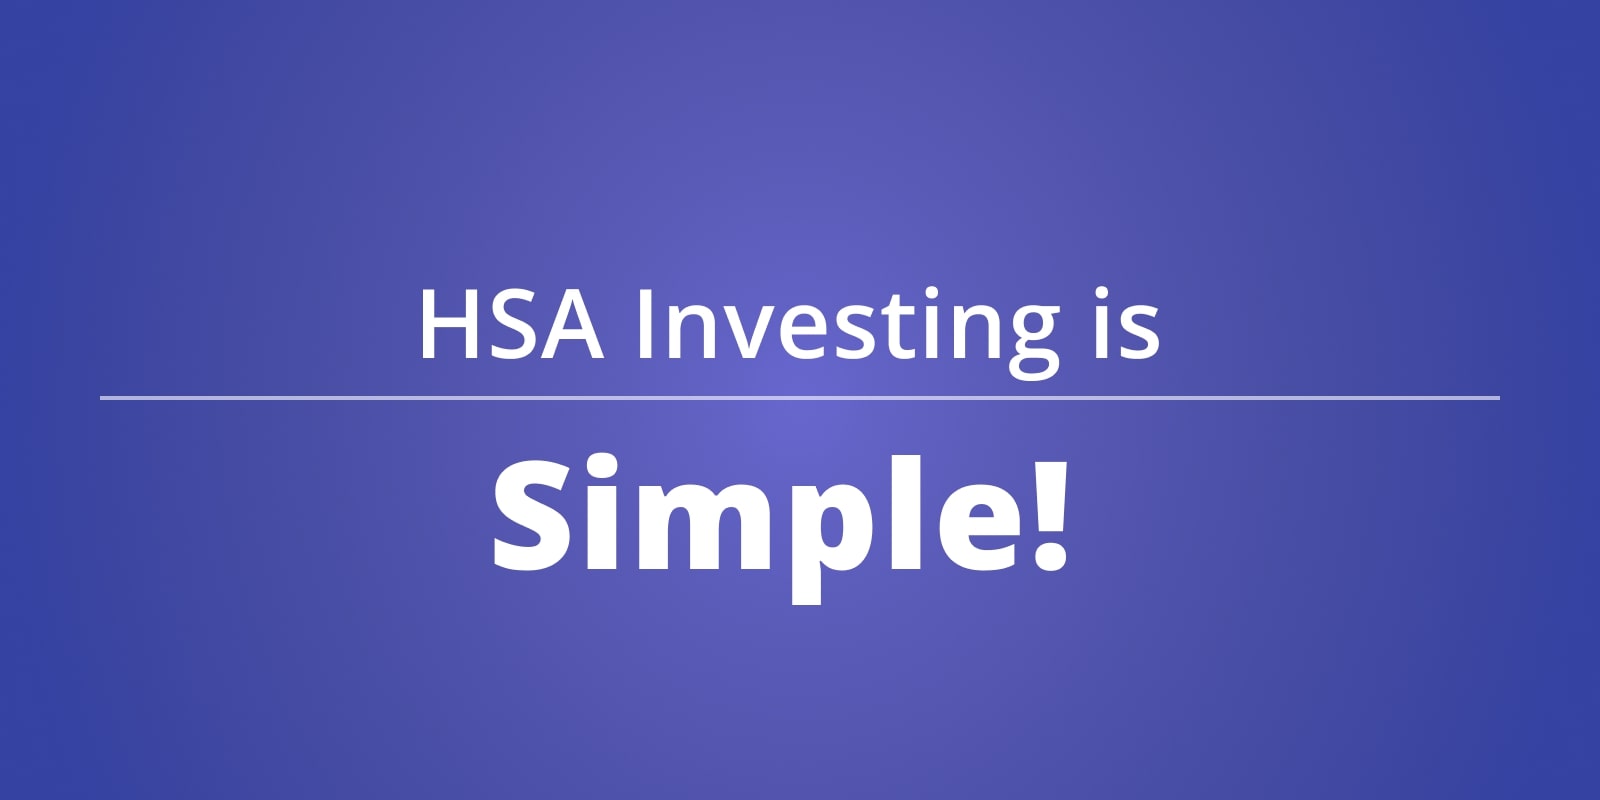 HSA Investing is Simple!